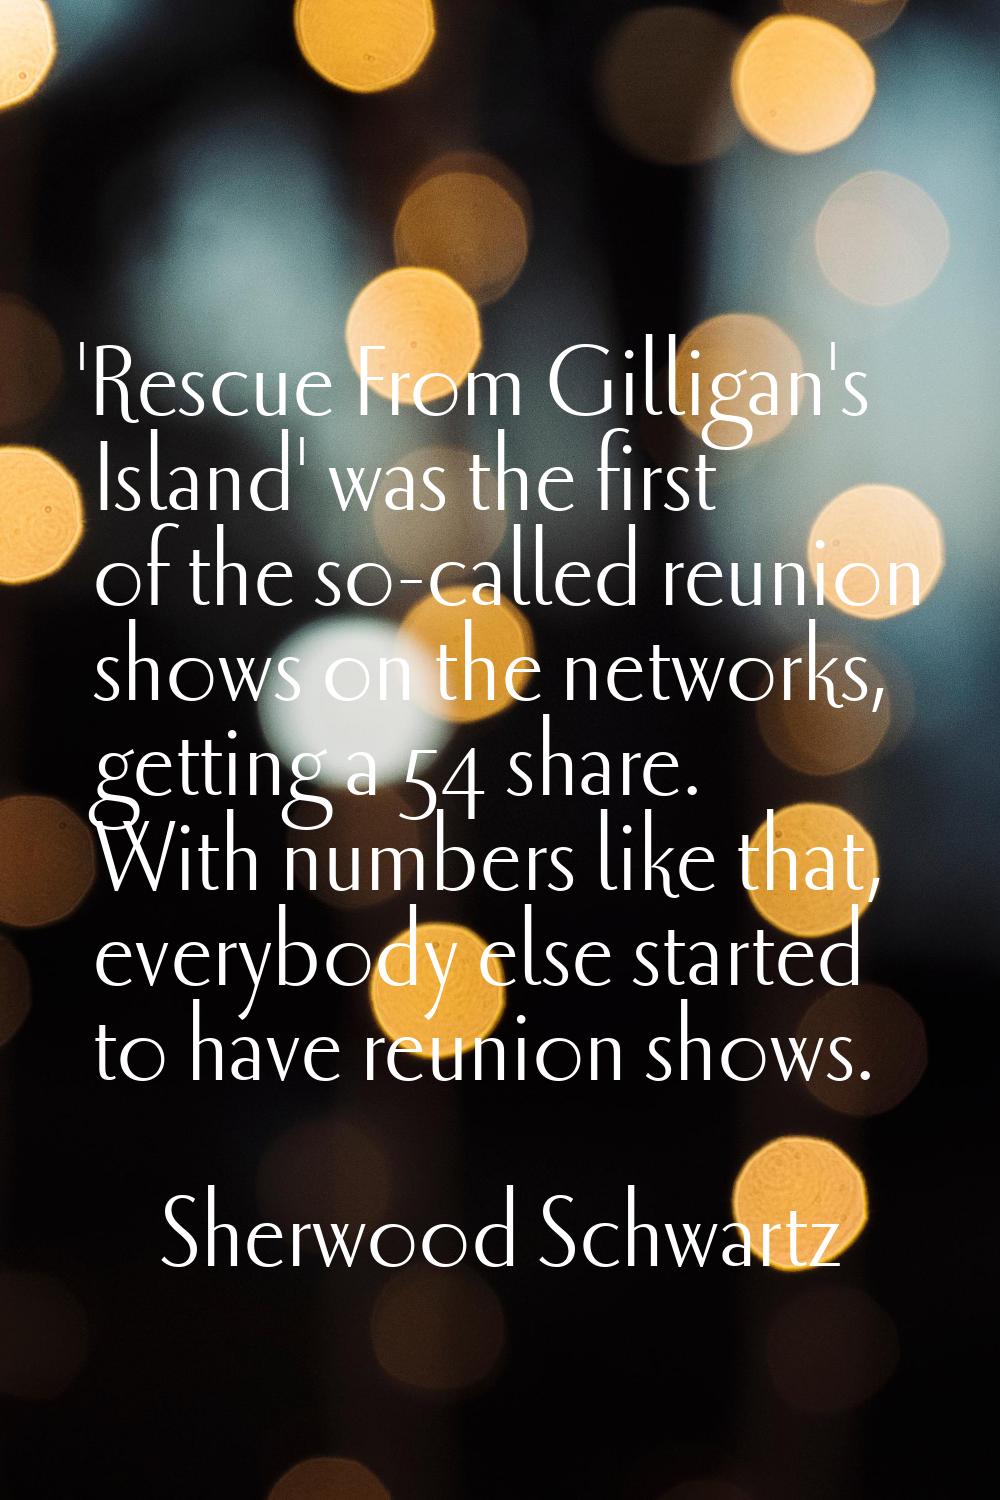 'Rescue From Gilligan's Island' was the first of the so-called reunion shows on the networks, getti